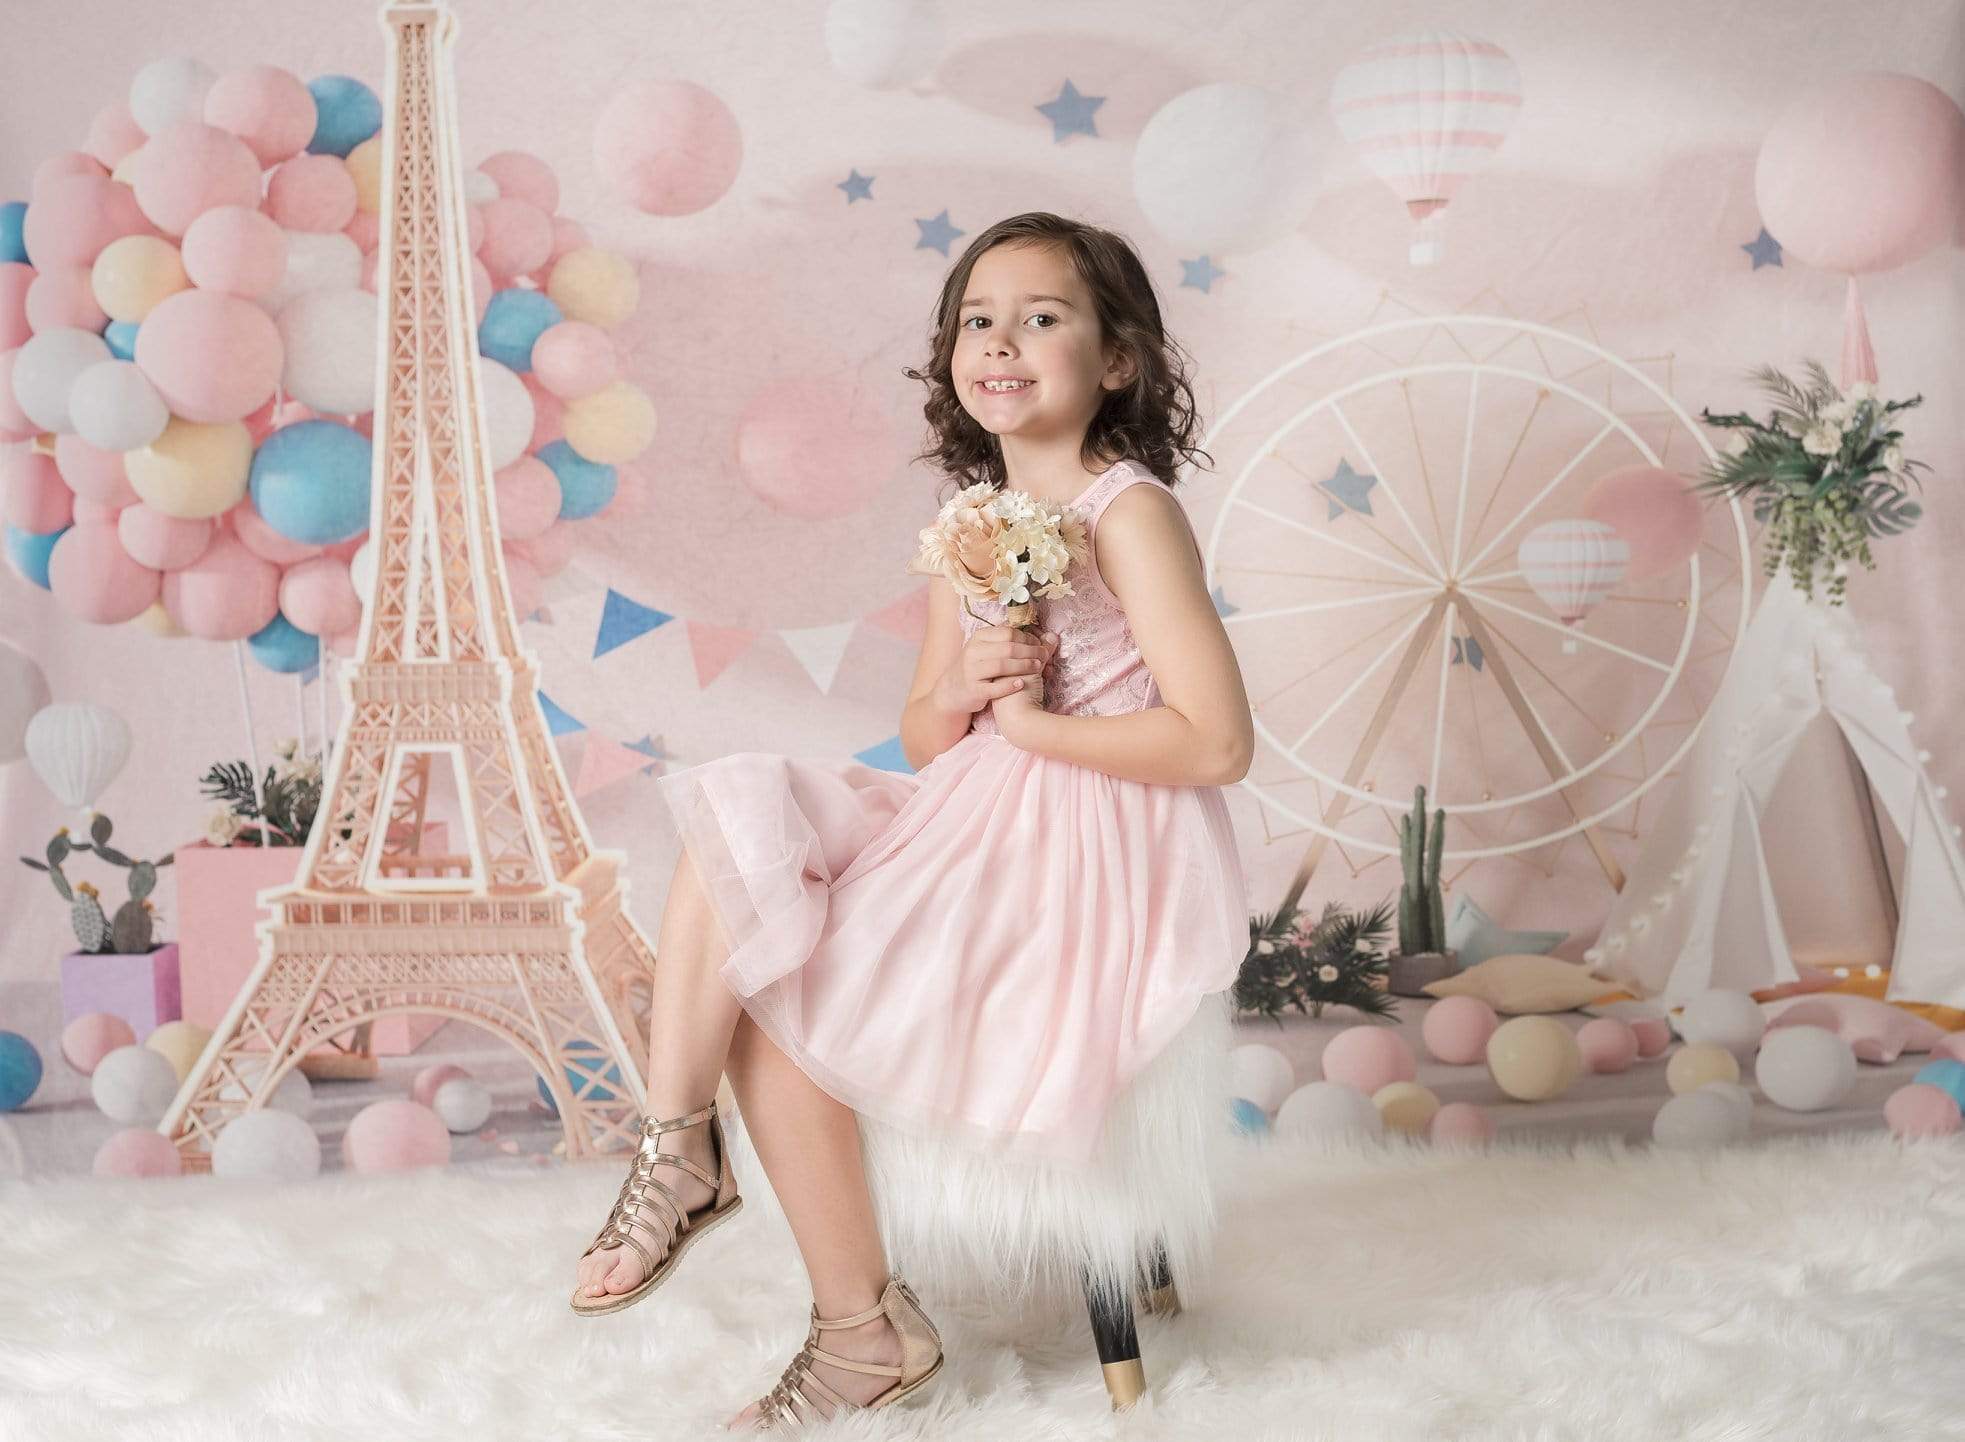 Kate Children Travel Around the World Cake Smash Backdrop for Photography